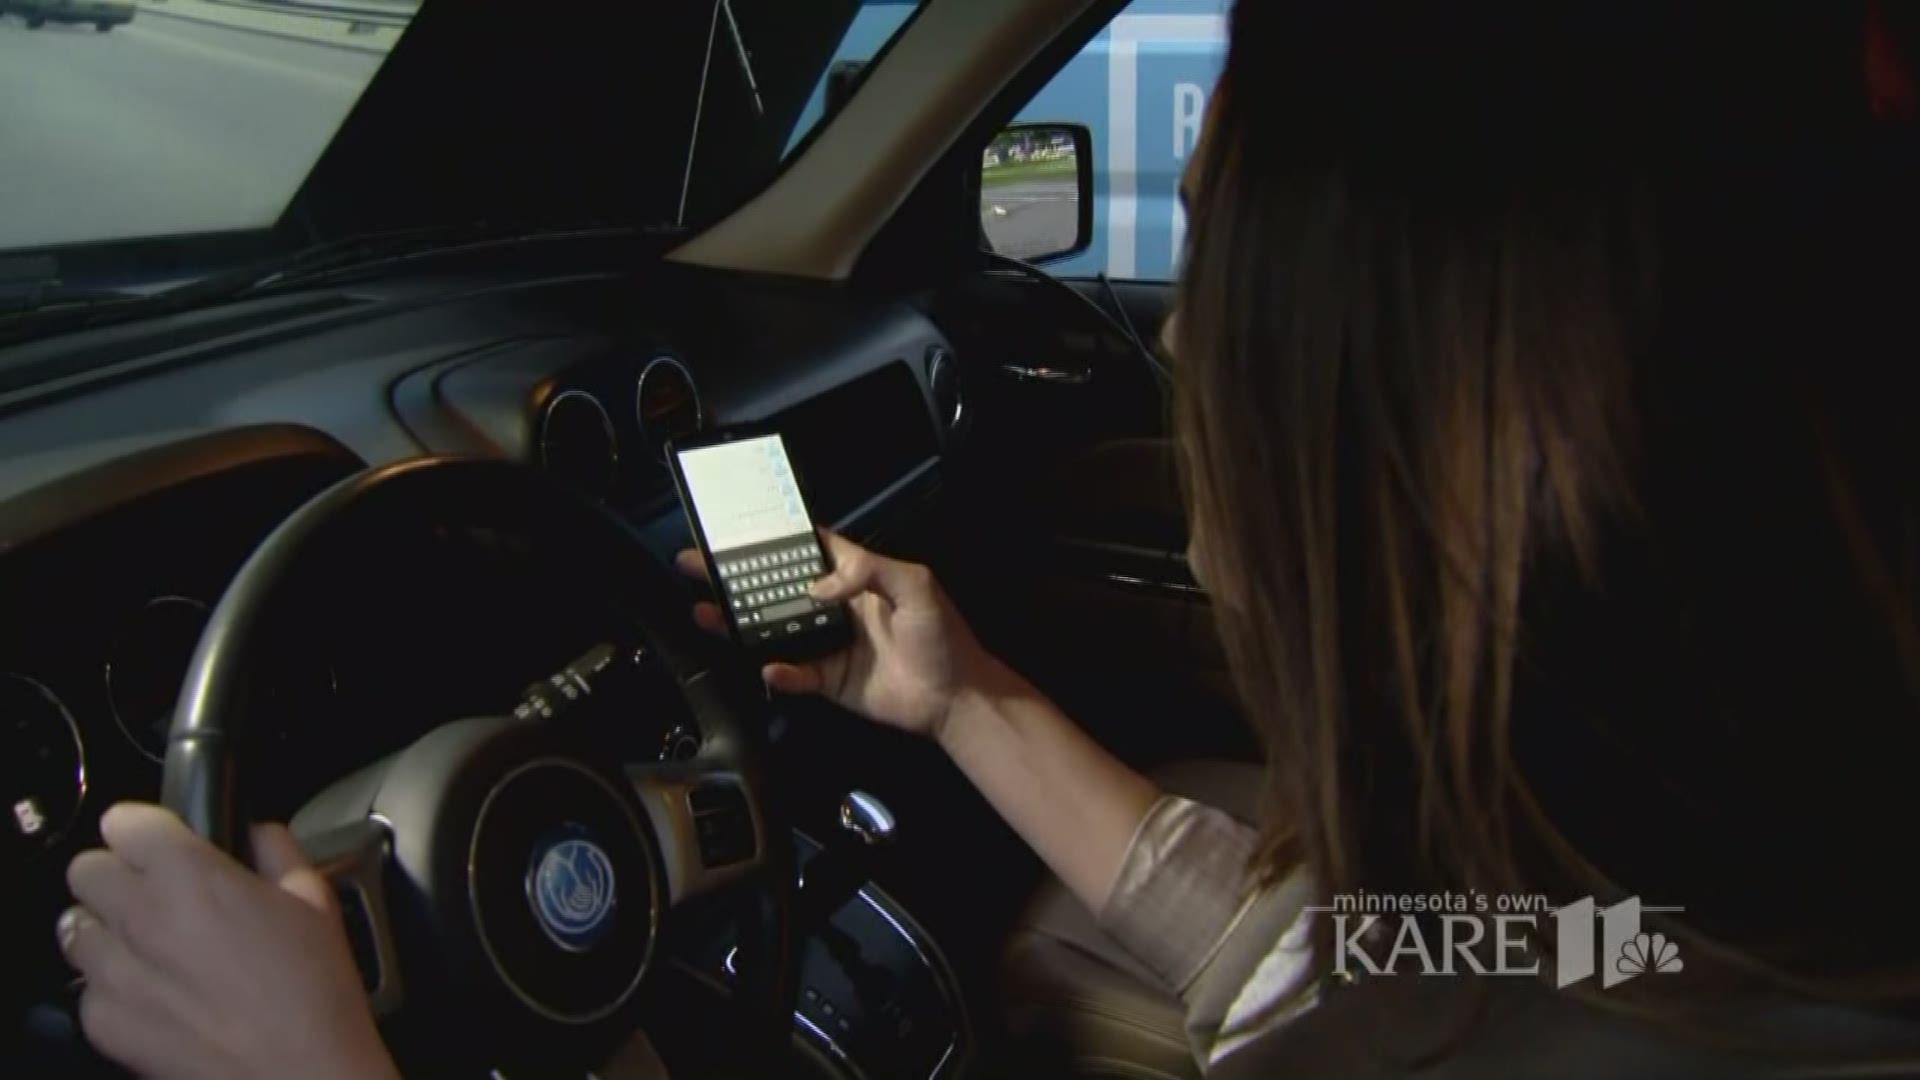 KARE 11's Alicia Lewis has been a champion of putting down the cell phone and ending distracted driving with her #eyesUP campagin, and a cool simulator sponsored by All State shows us why.